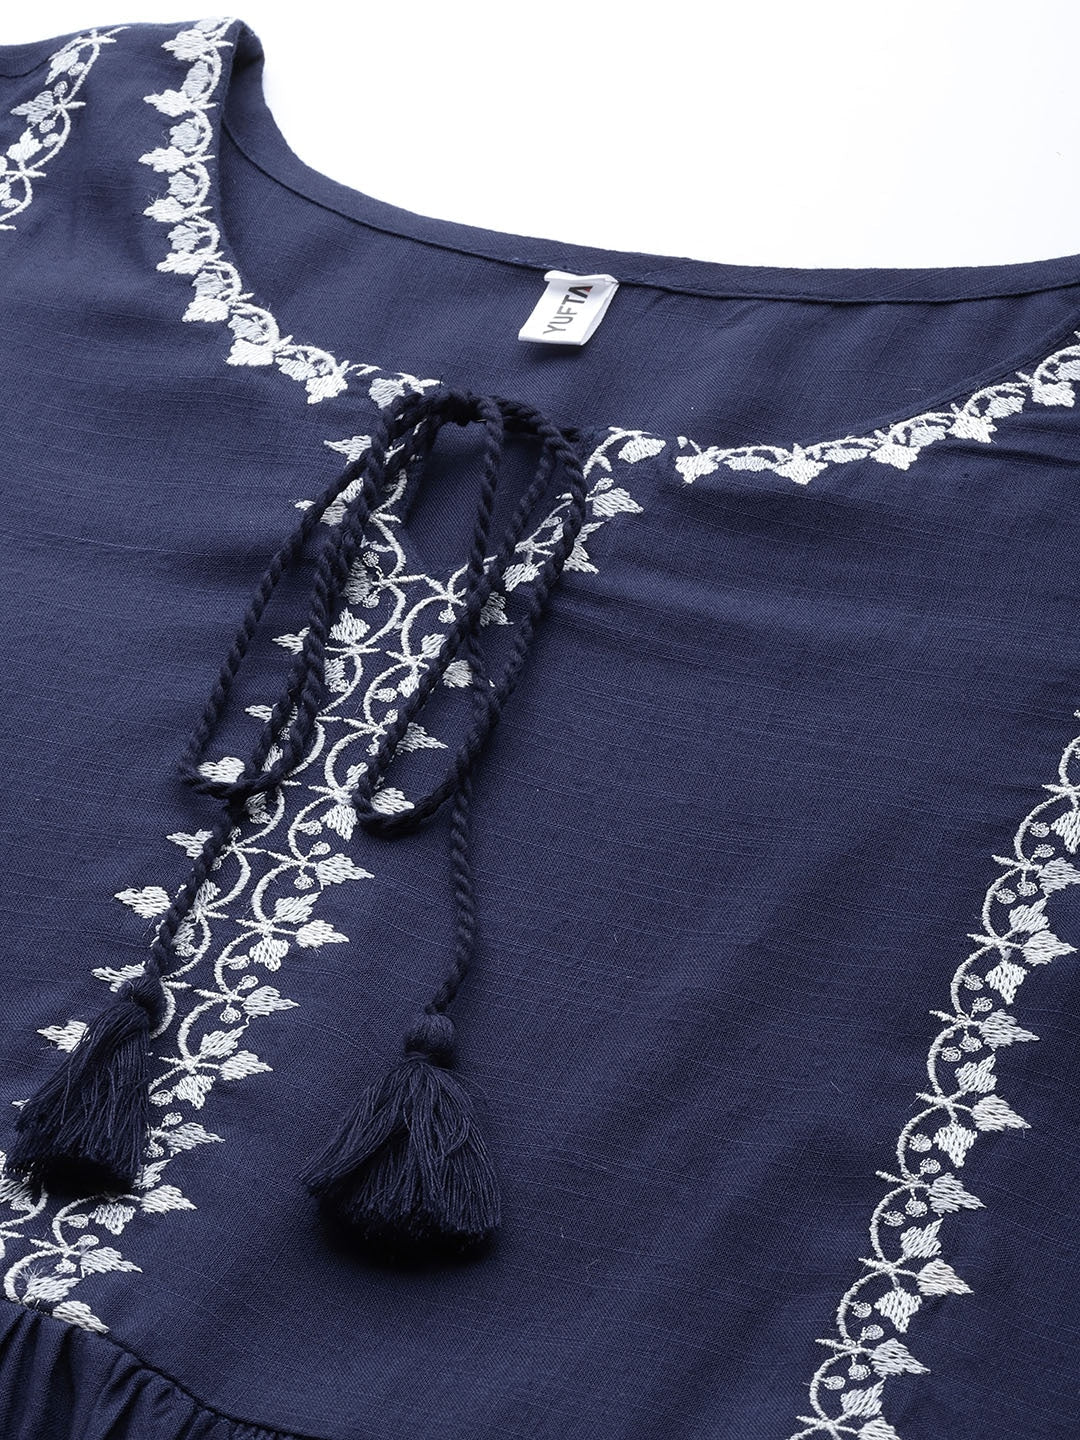 Navy Blue Solid Embroidered Dress-Yufta Store-9243DRSNBS